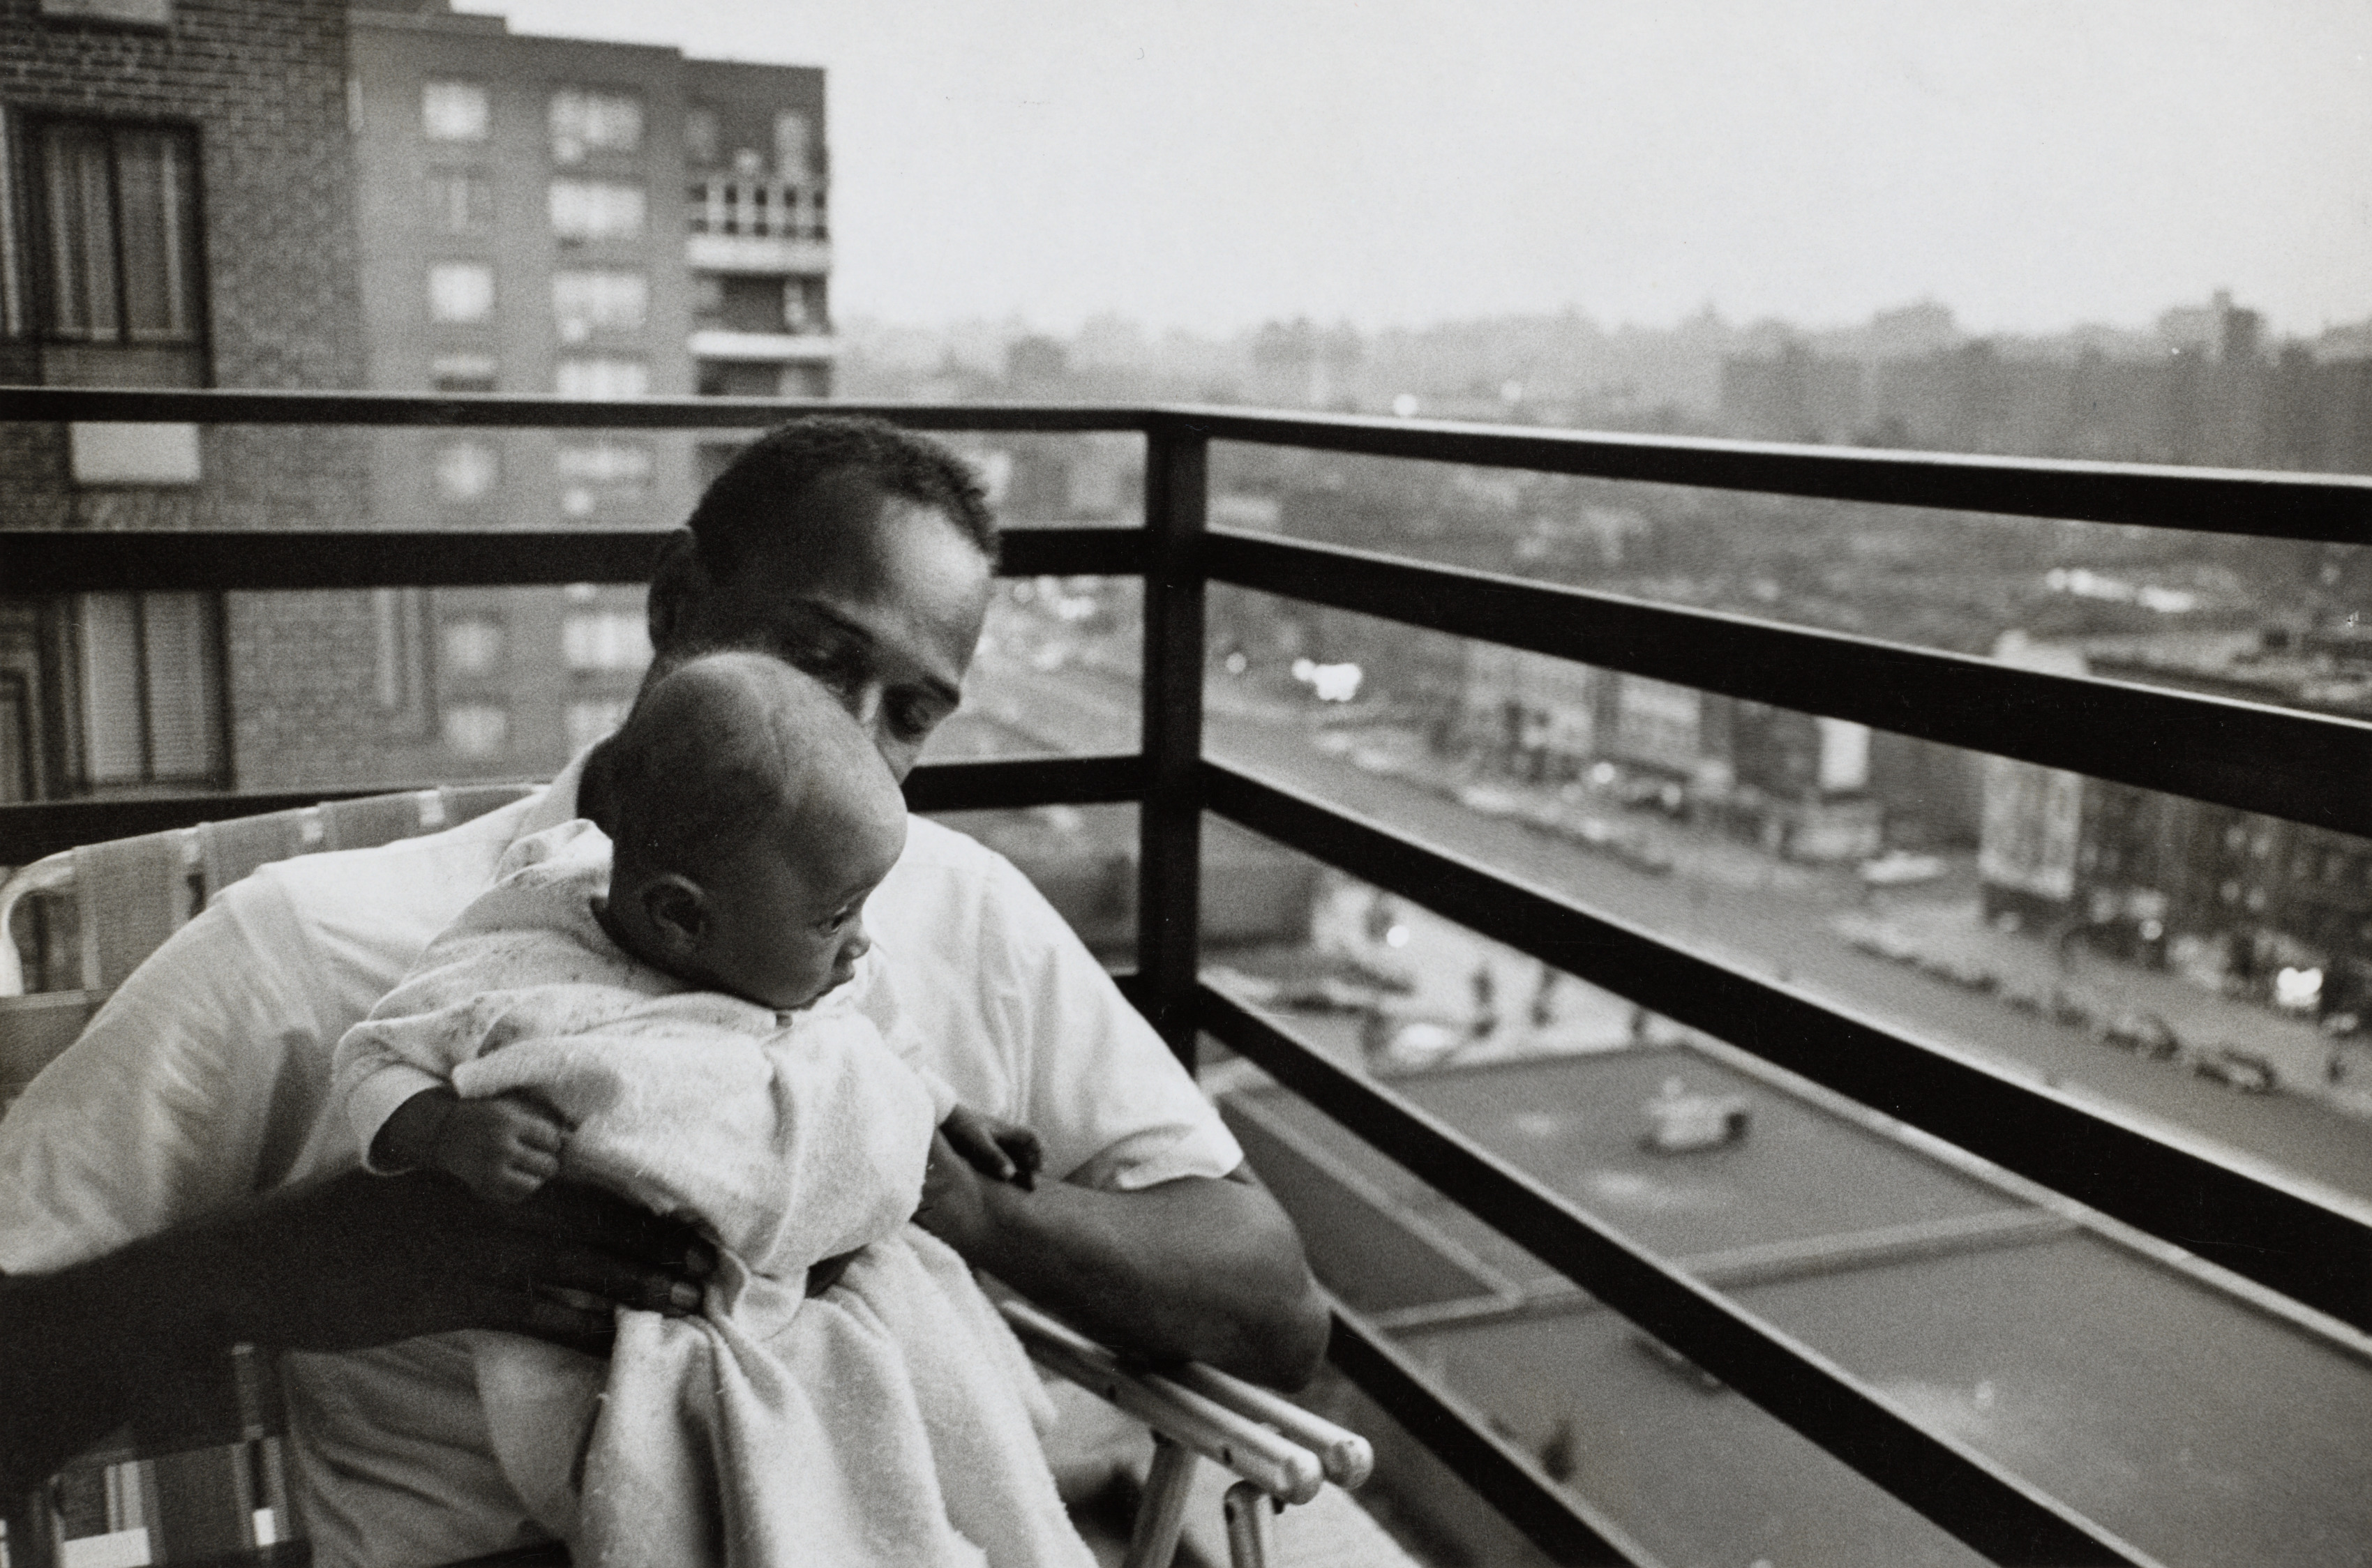 Sociology student with his 3 month old daughter on the balcony of his apartment, Harlem, New York City, USA